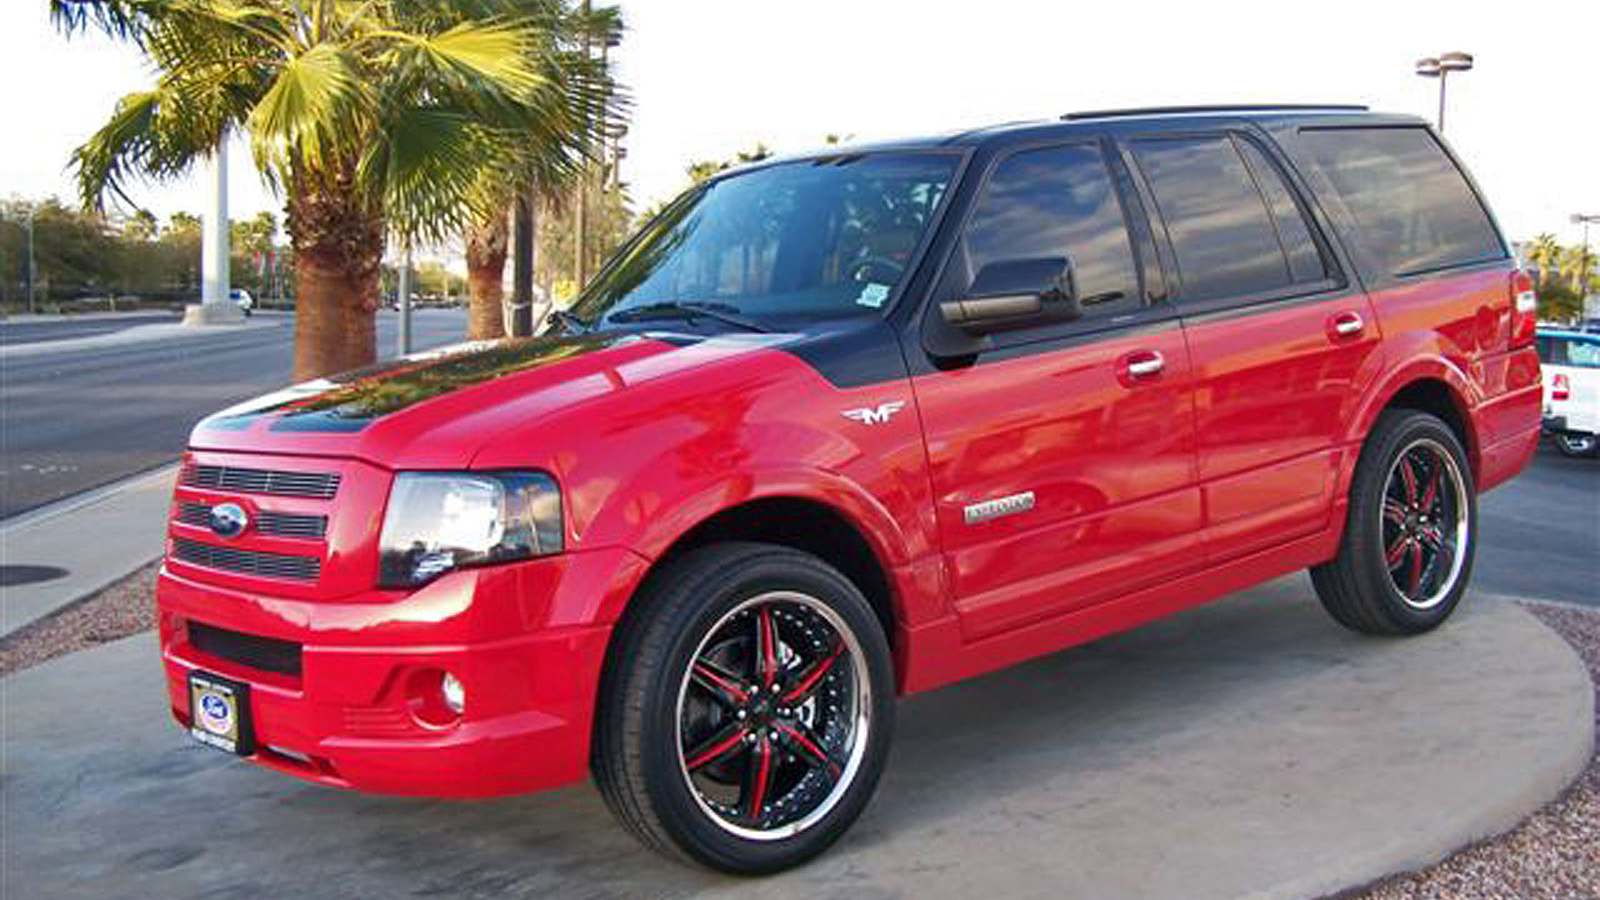 2008 Ford expedition warranty information #3